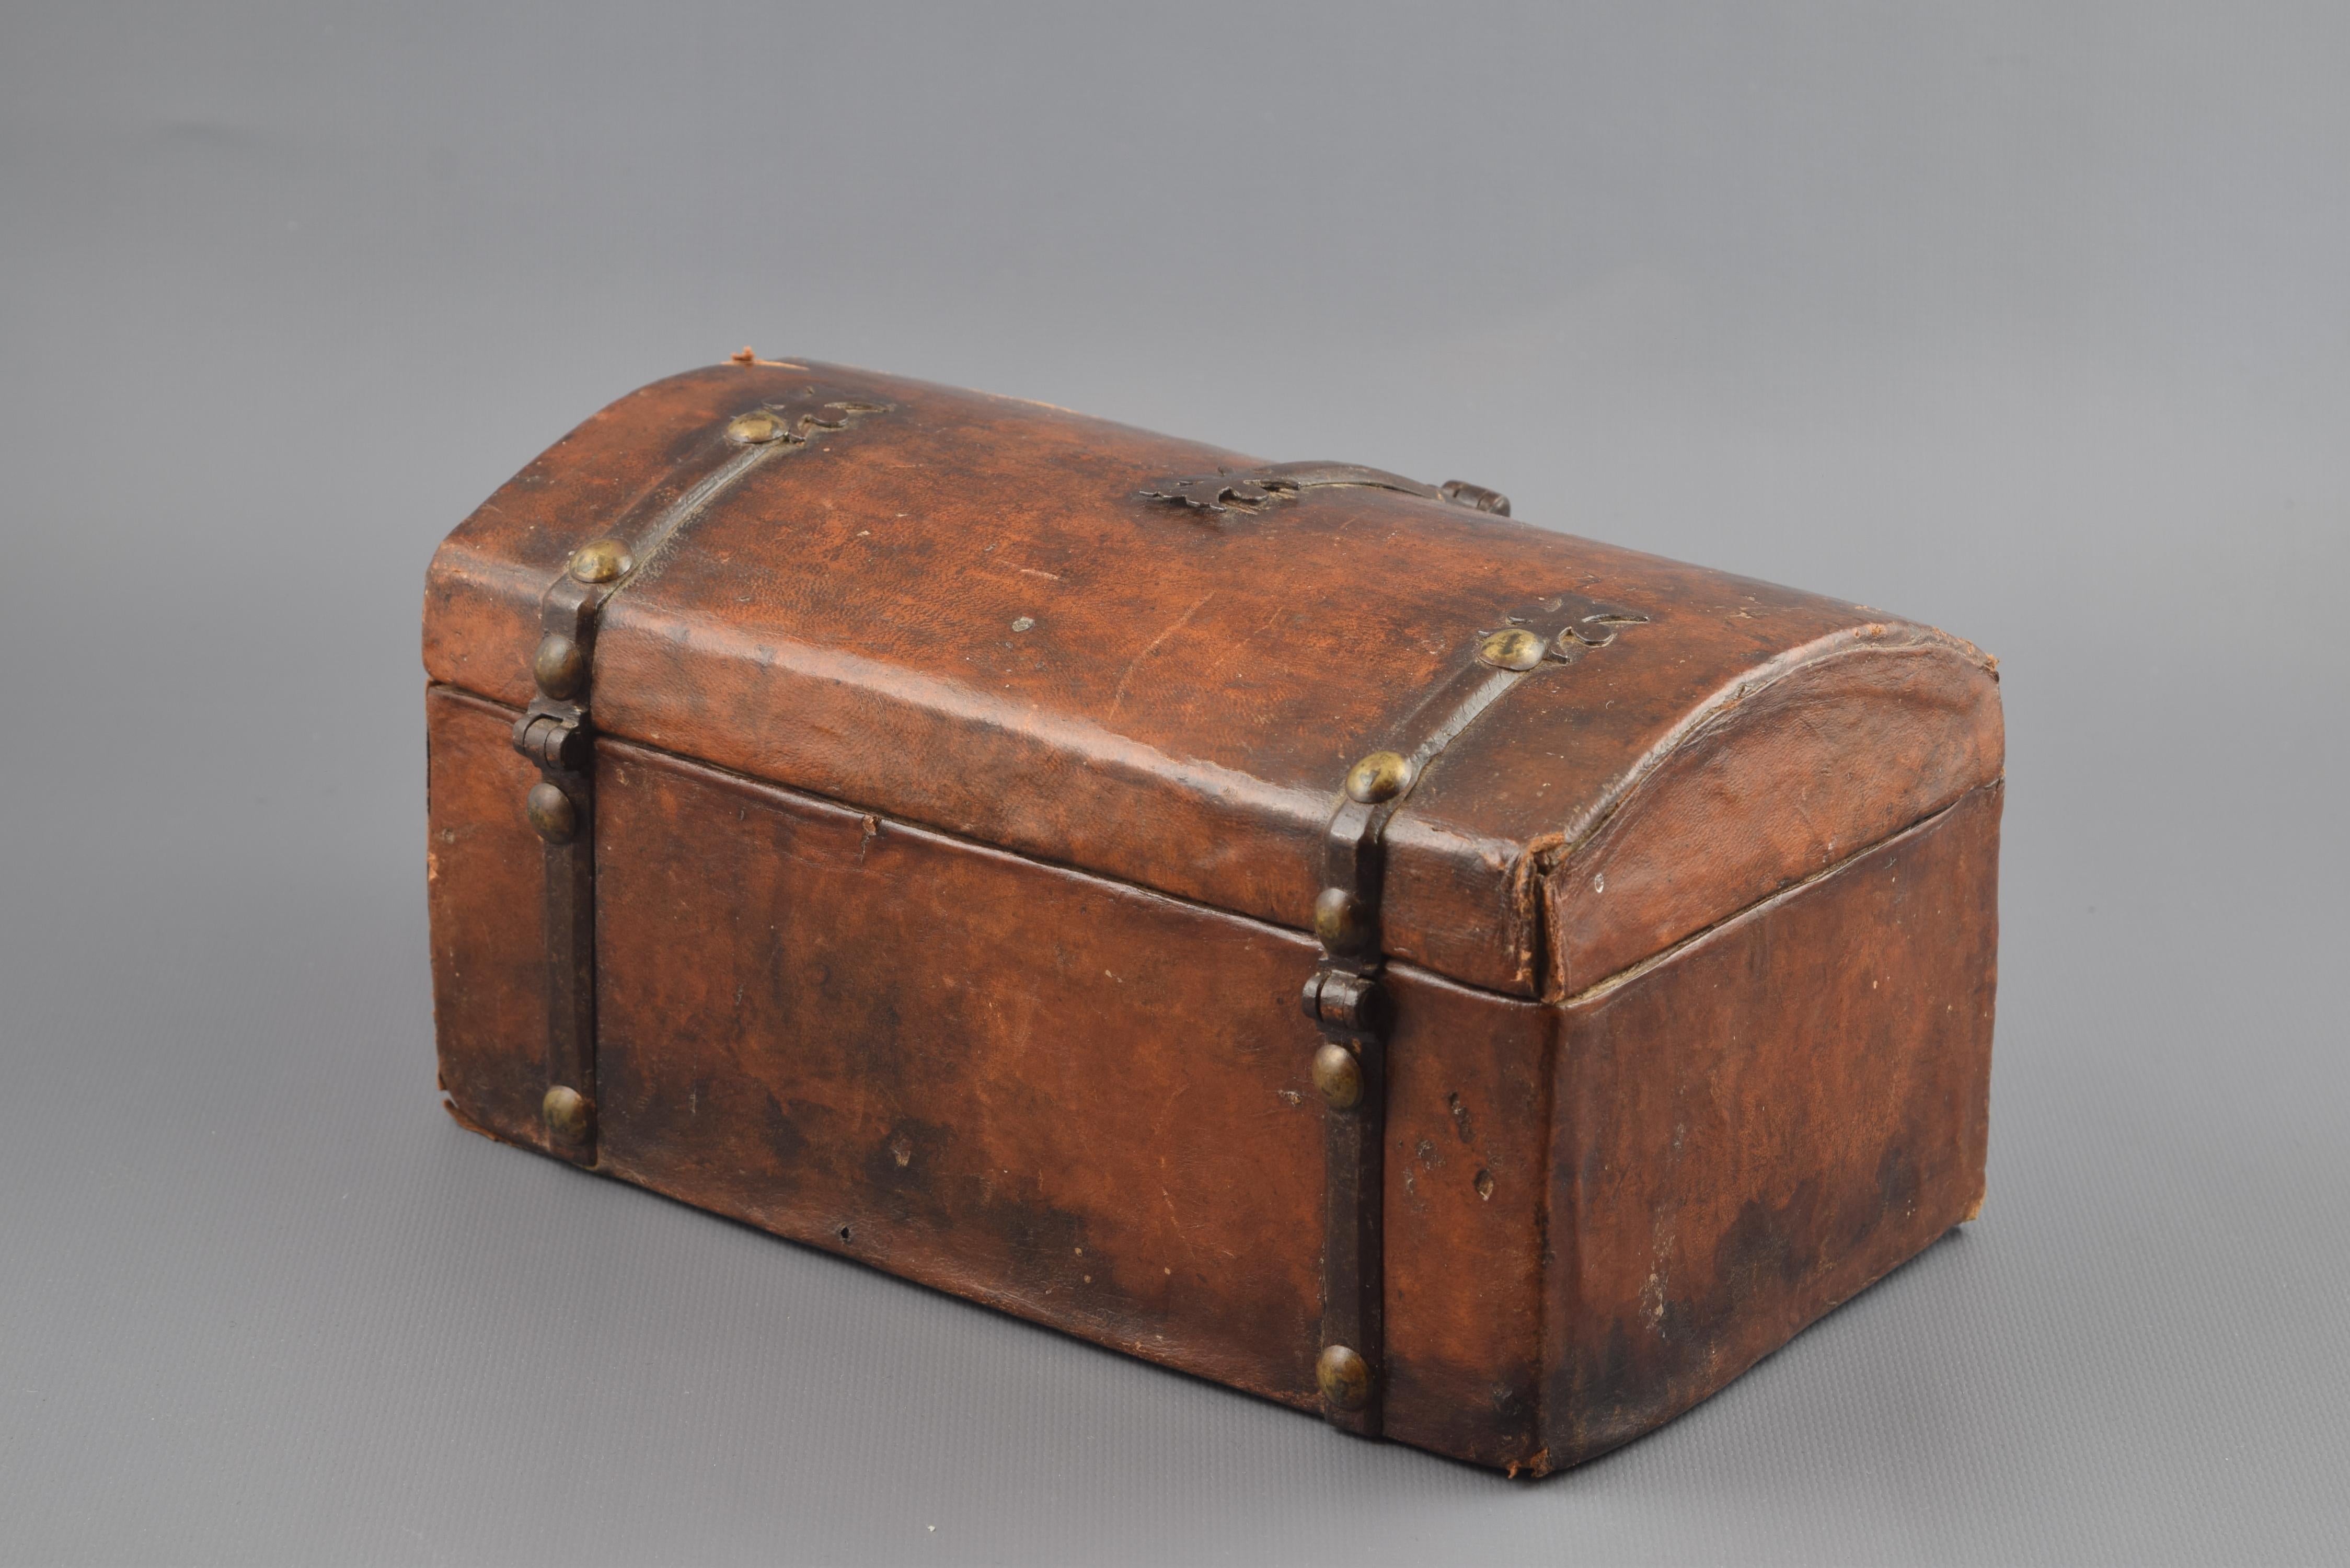 Spanish Wooden Chest, Leather and Metal, 17th Century